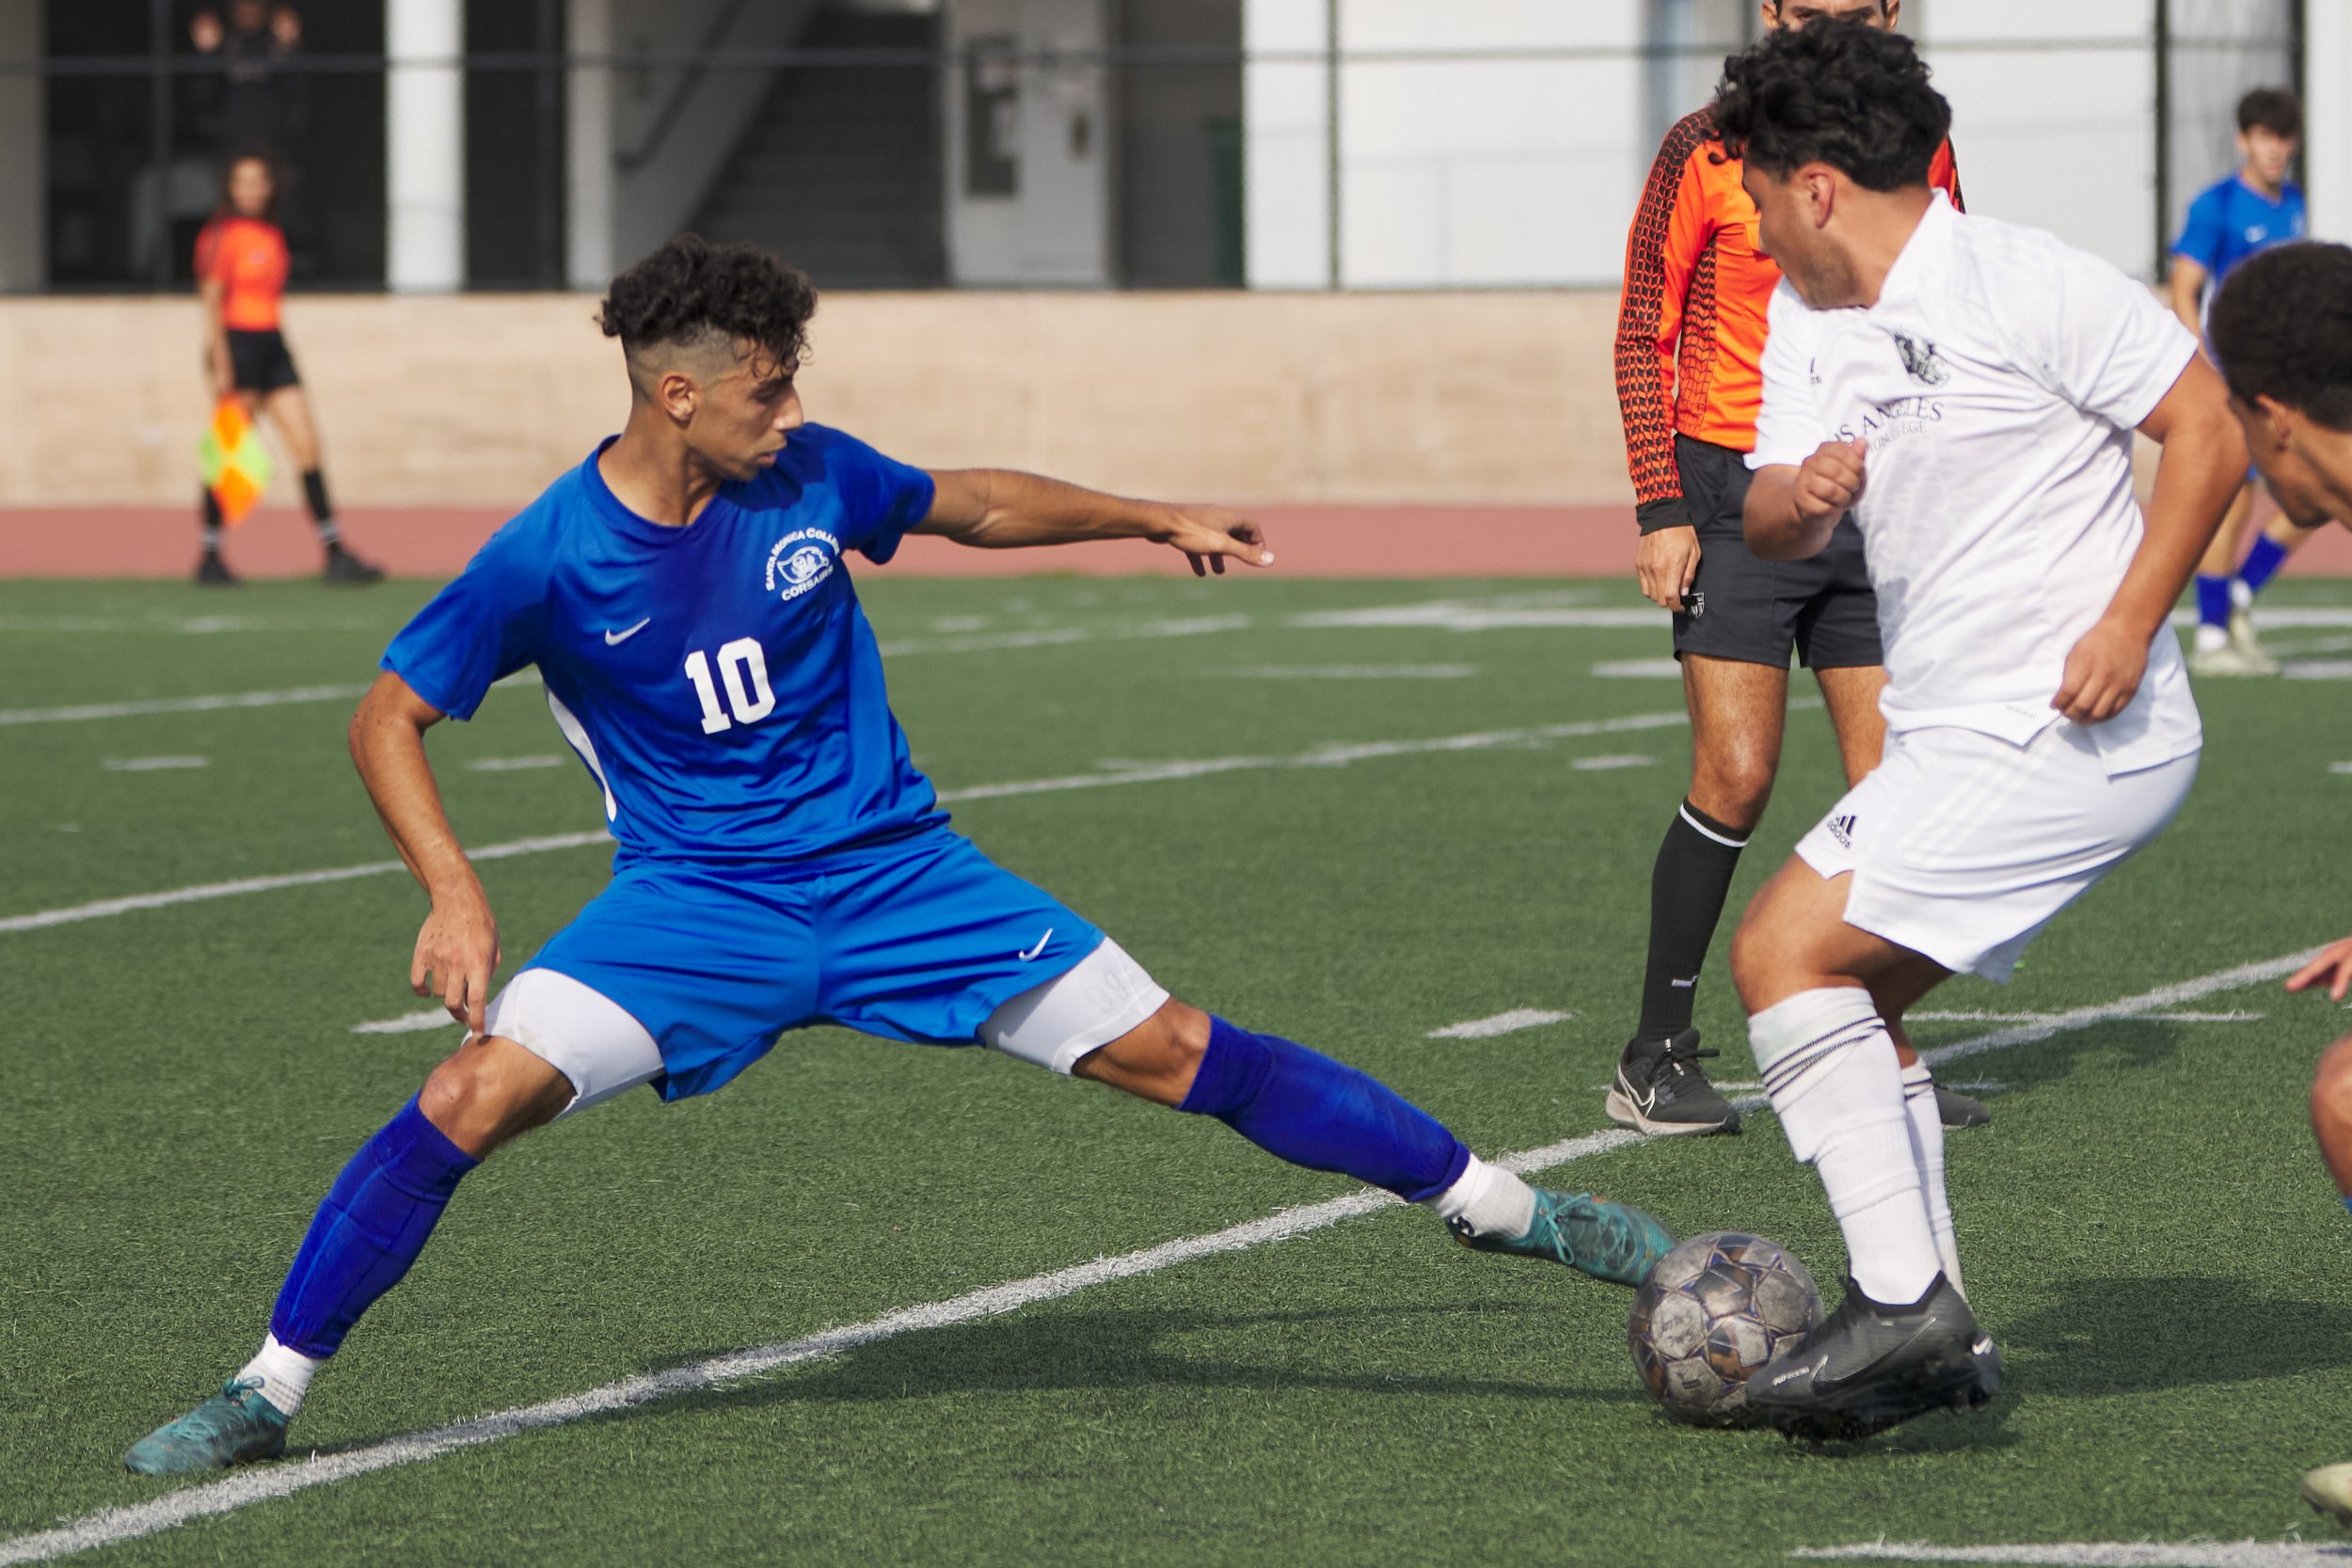  Santa Monica College Corsairs' Roey Kivity and Los Angeles Mission College Eagles' Luis Lima during the men's soccer match on Tuesday, Nov. 1, 2022, at Corsair Field in Santa Monica, Calif. The Corsairs won 3-0. (Nicholas McCall | The Corsair) 